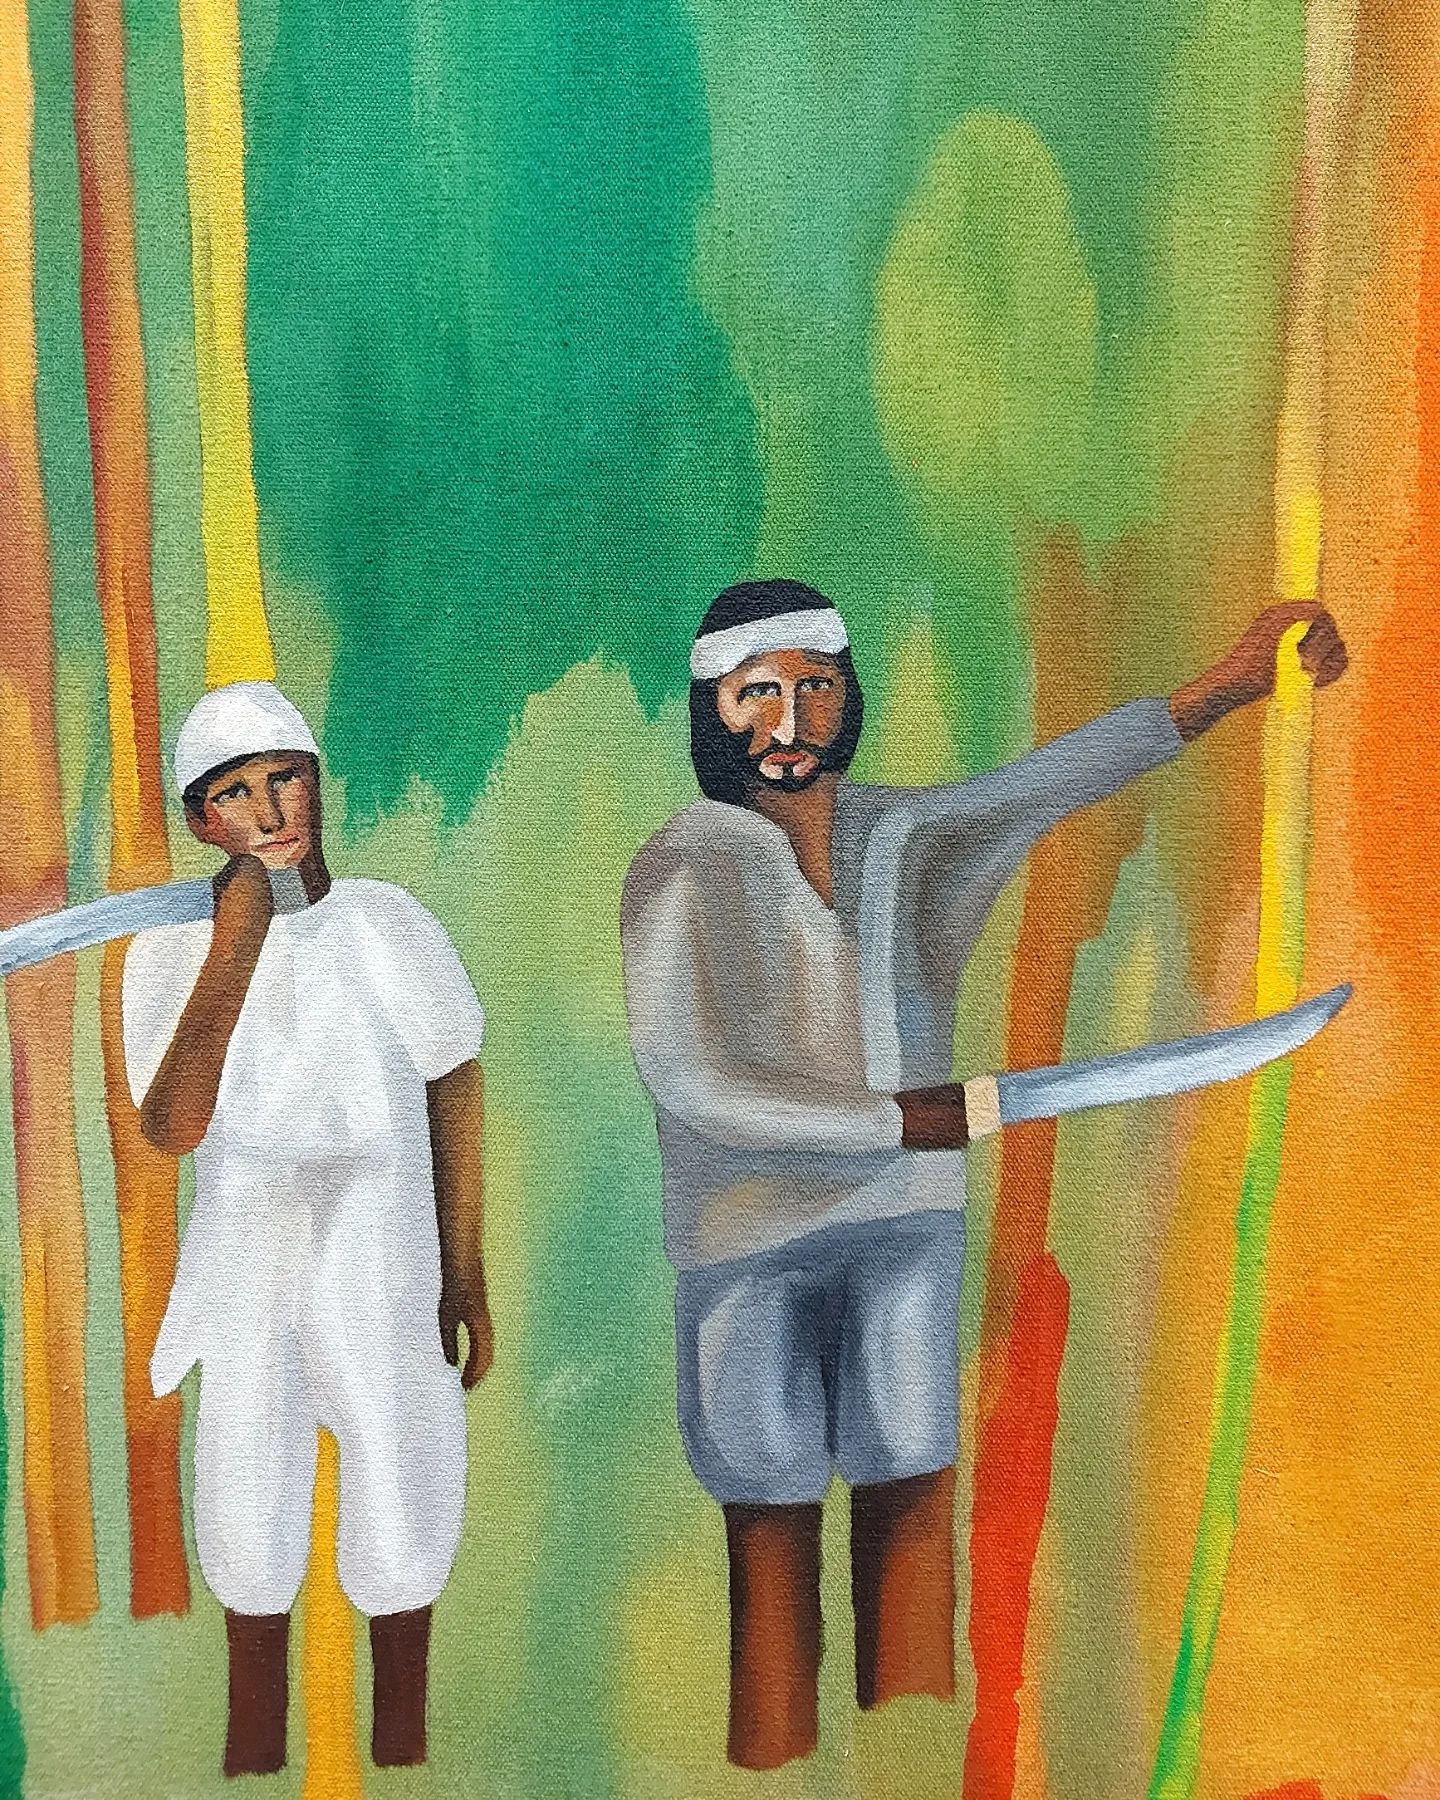 Another work in progress detail shot of the painting that I am currently working on. This composition is inspired by a photograph taken in the 19th century of Indian indentured labourers reaping sugar cane with cutlasses in South Africa. 🌴🤍🙏🏼🖌🕊